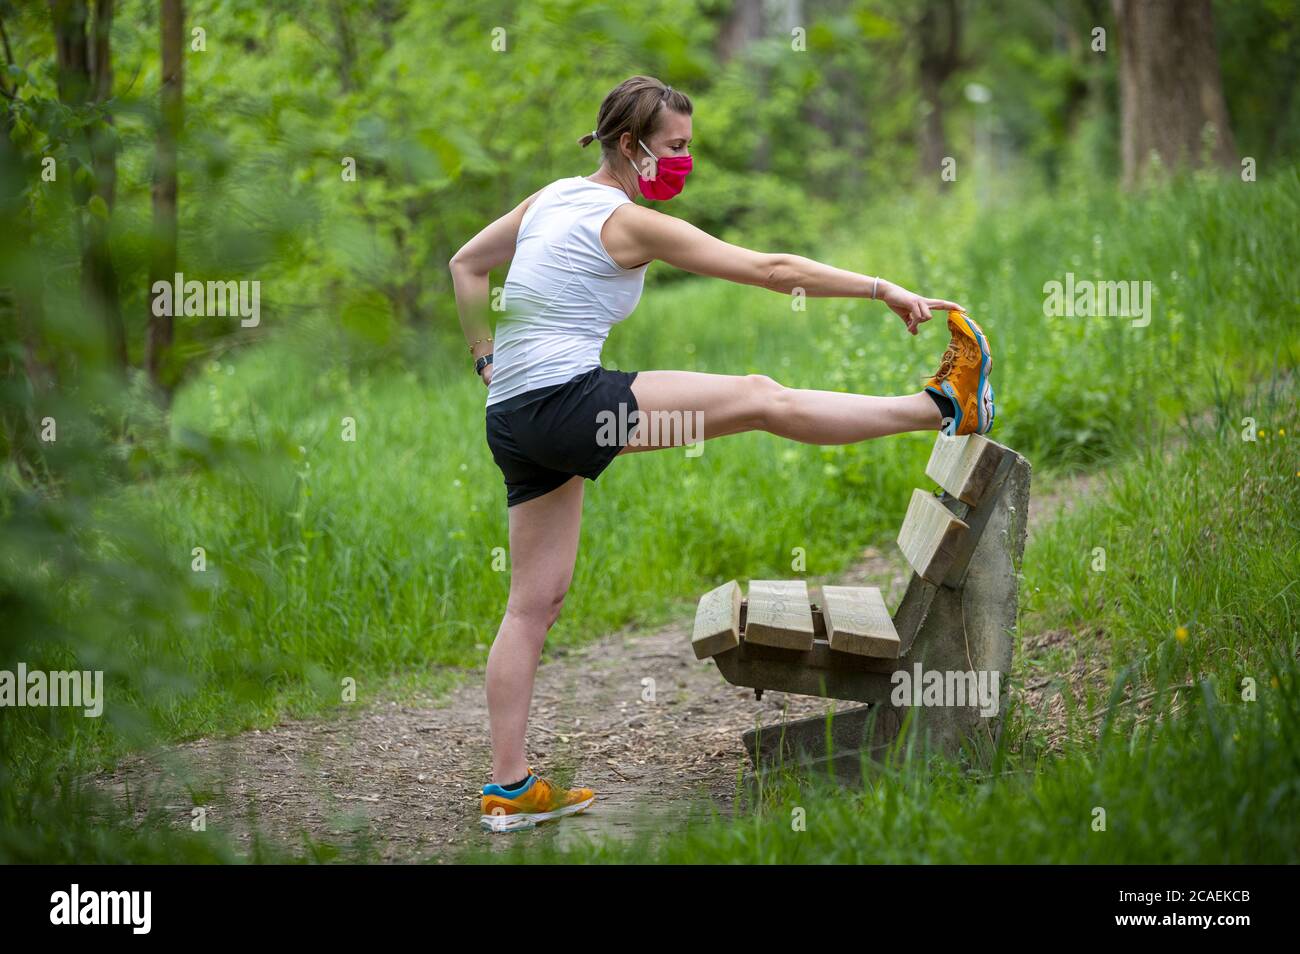 Stay in fit during Coronavirus. A sportive woman is jogging outdoor, she have protective mask on face. Running in the days of the Covid-19. Stock Photo